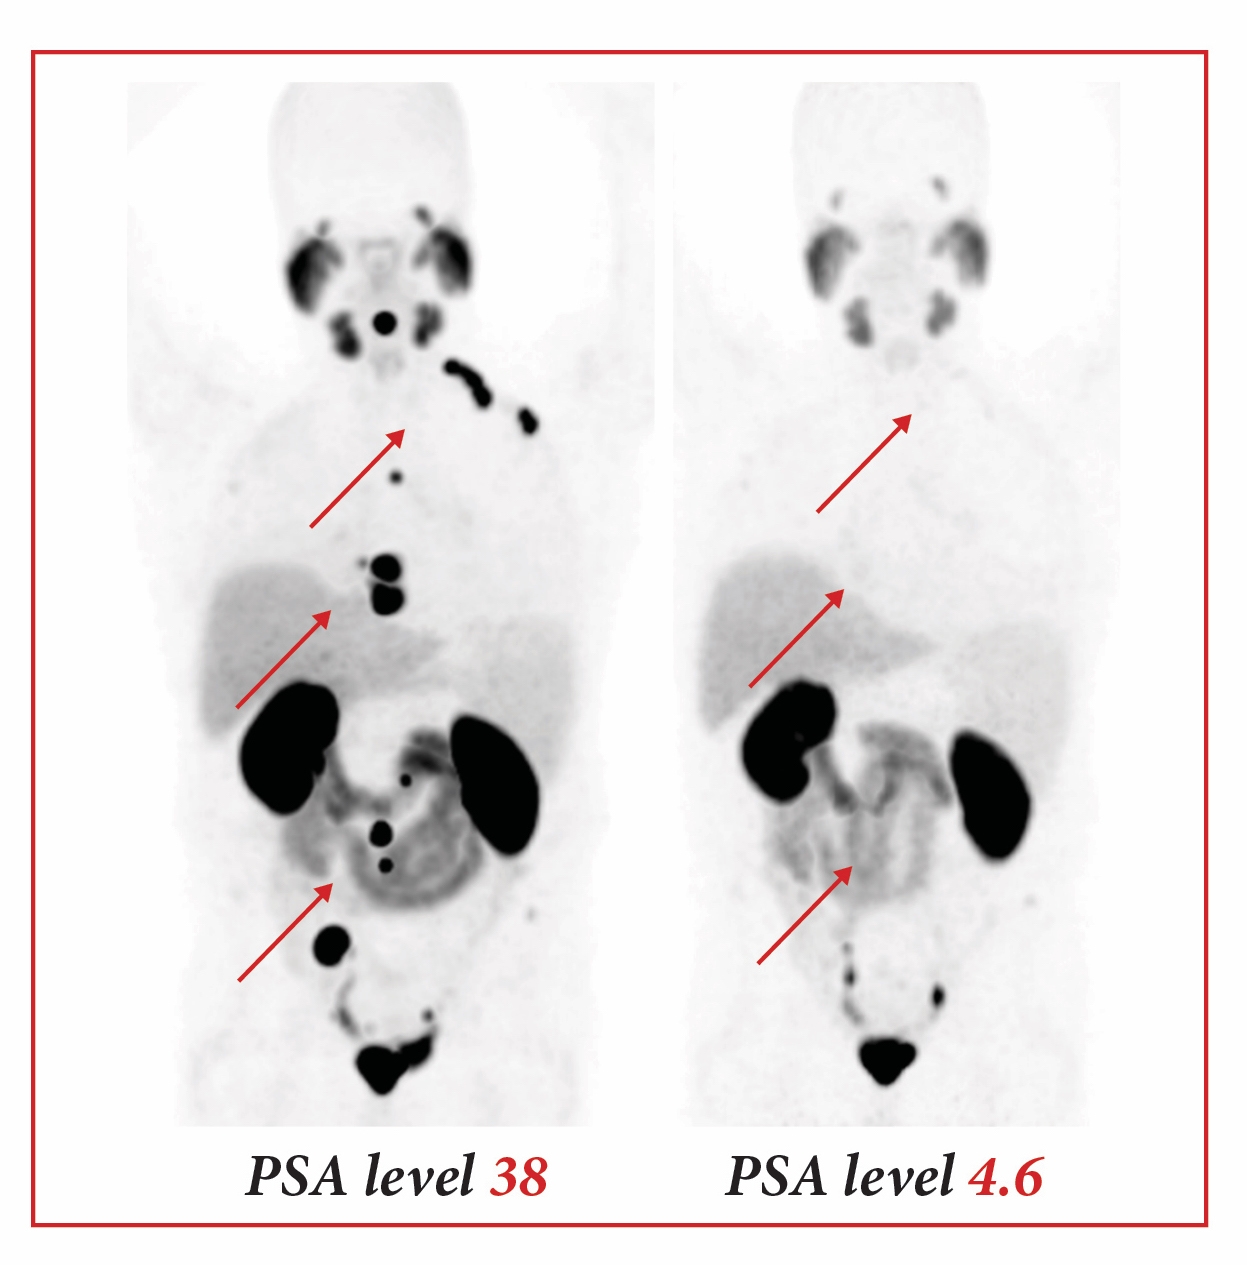 Illustration of PSMA-617 endoradiotherapy success in treating prostate cancer. PET image illustrating the remission of prostate cancer following radiotherapeutic treatment with PSMA-617. The figure shows two PET images, one prior and one after treatment.